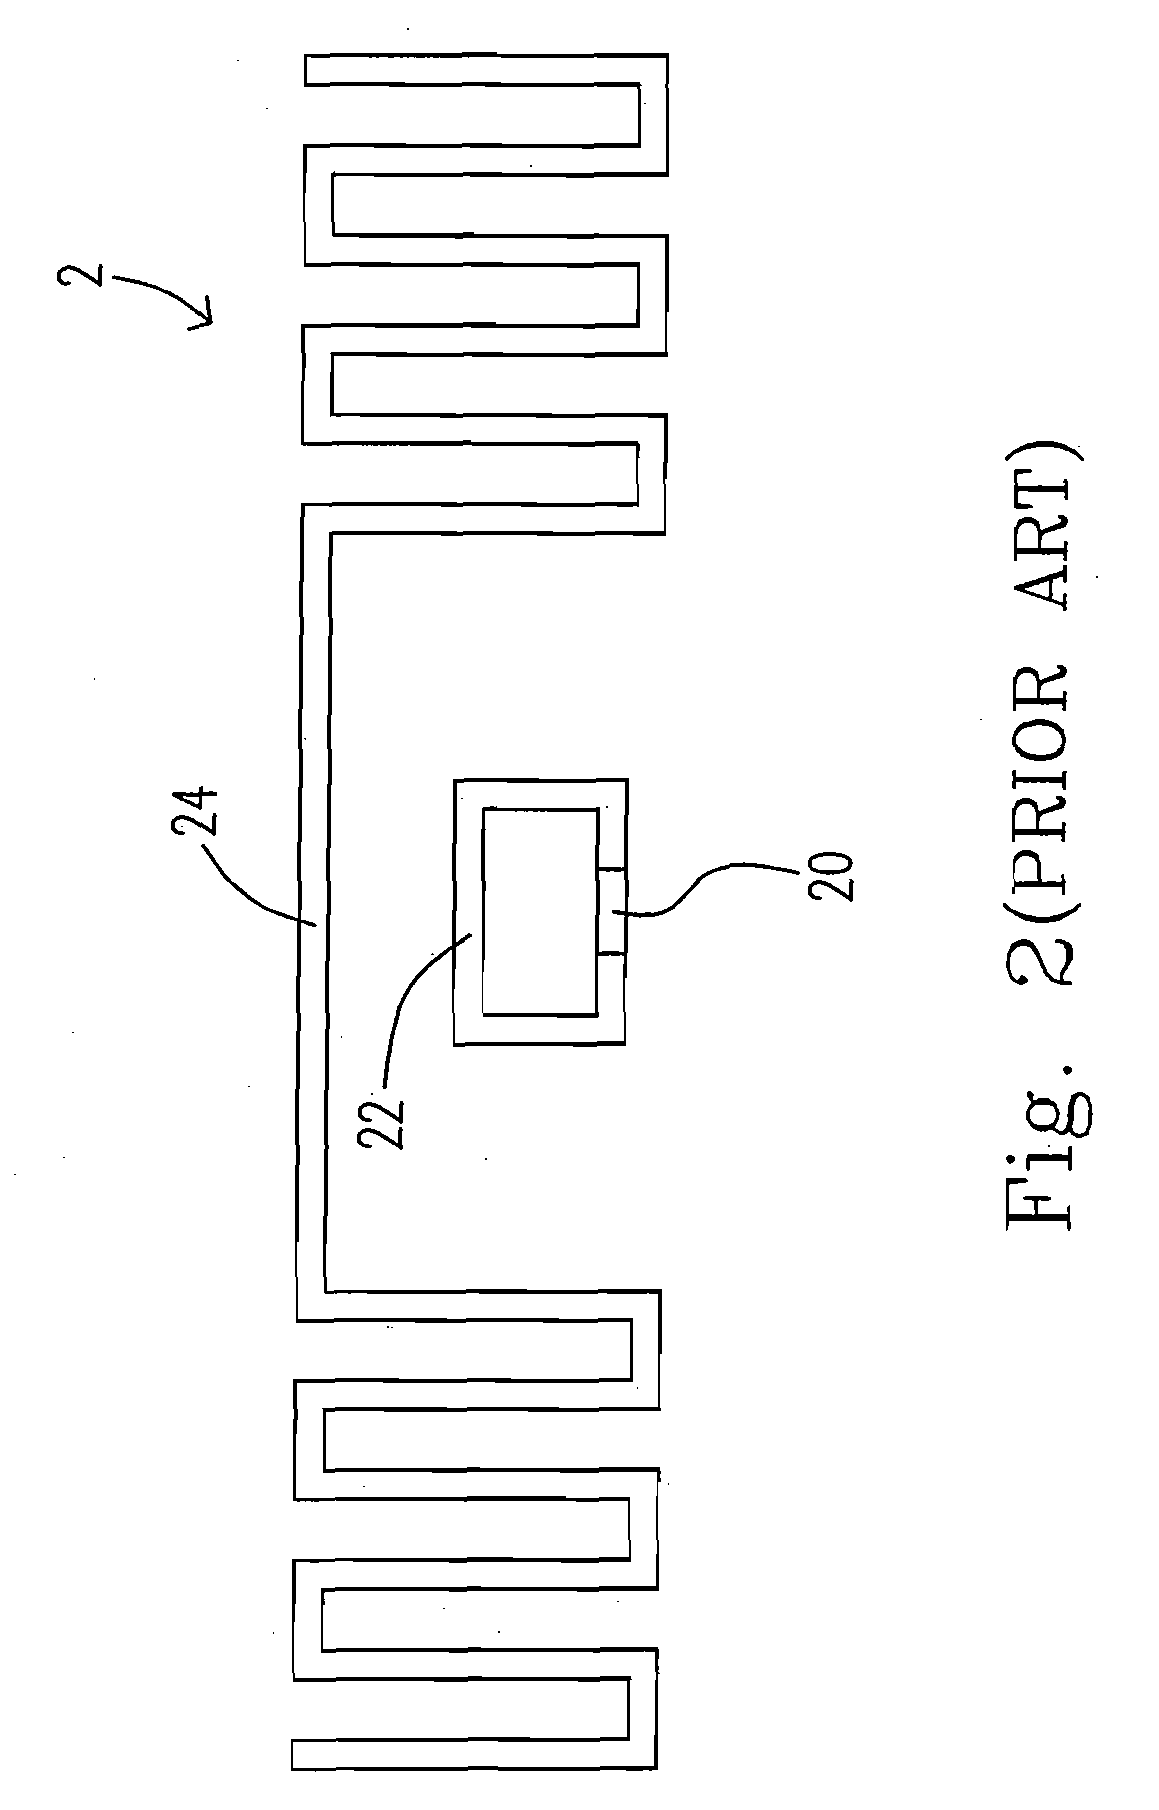 Antenna structure and method for increasing its bandwidth